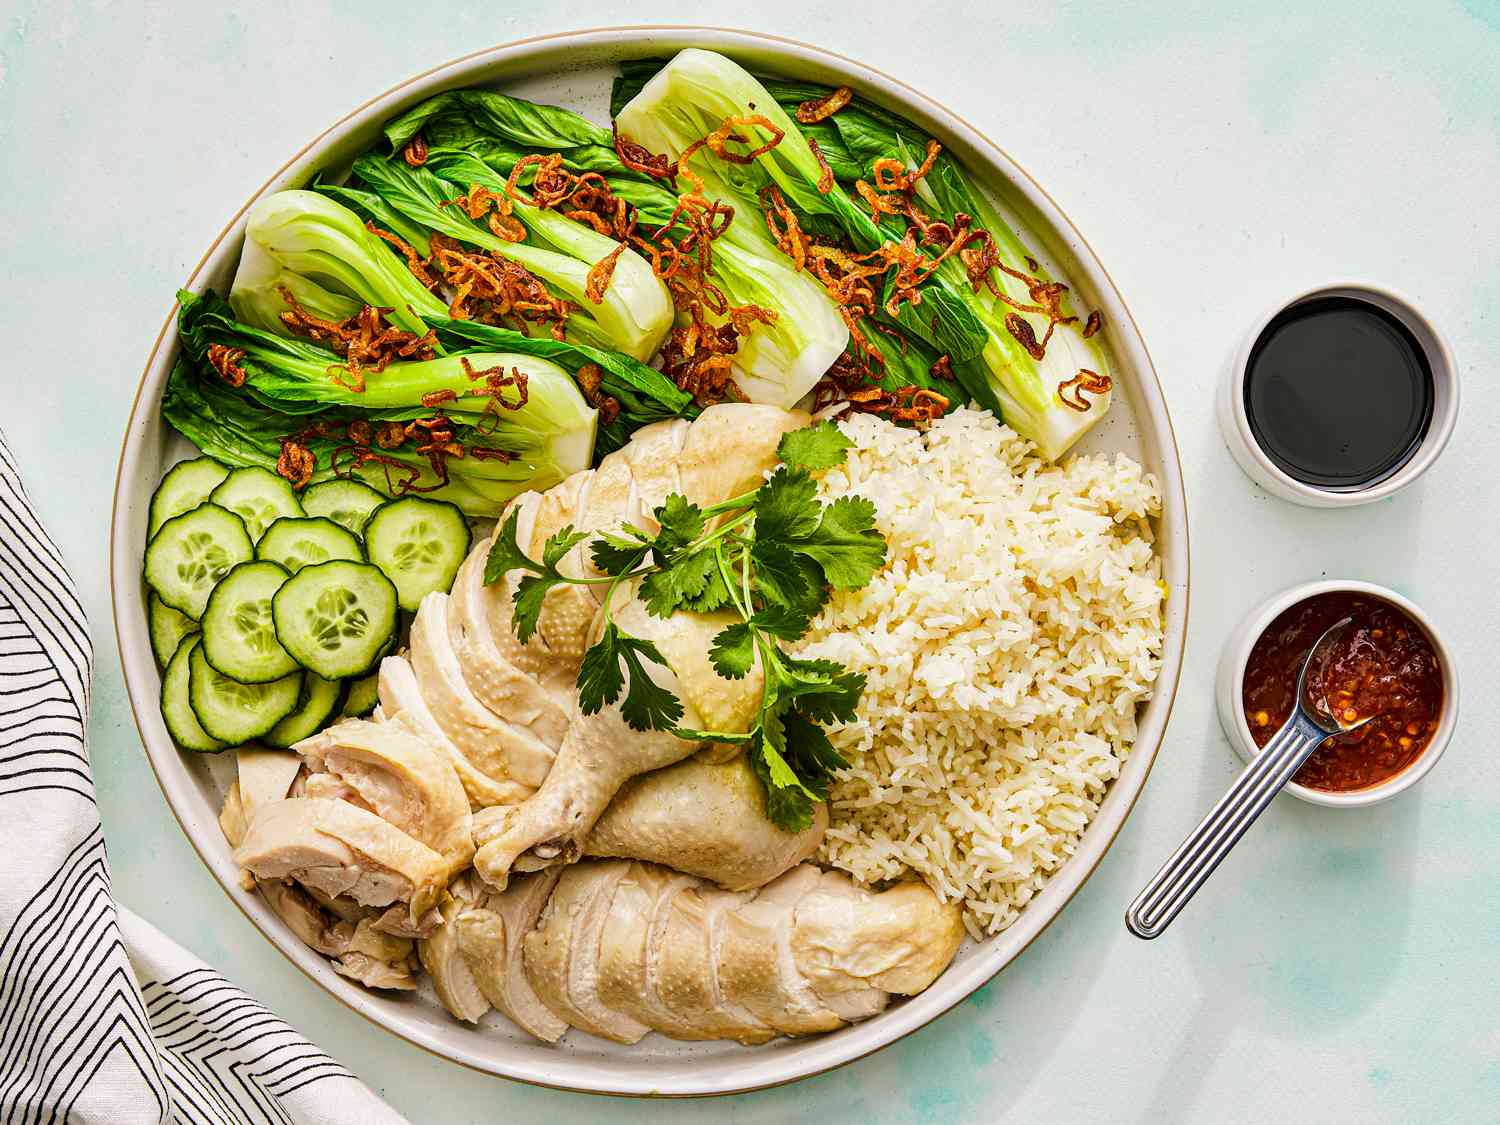 Overhead view of Hainanese Chicken Rice Set